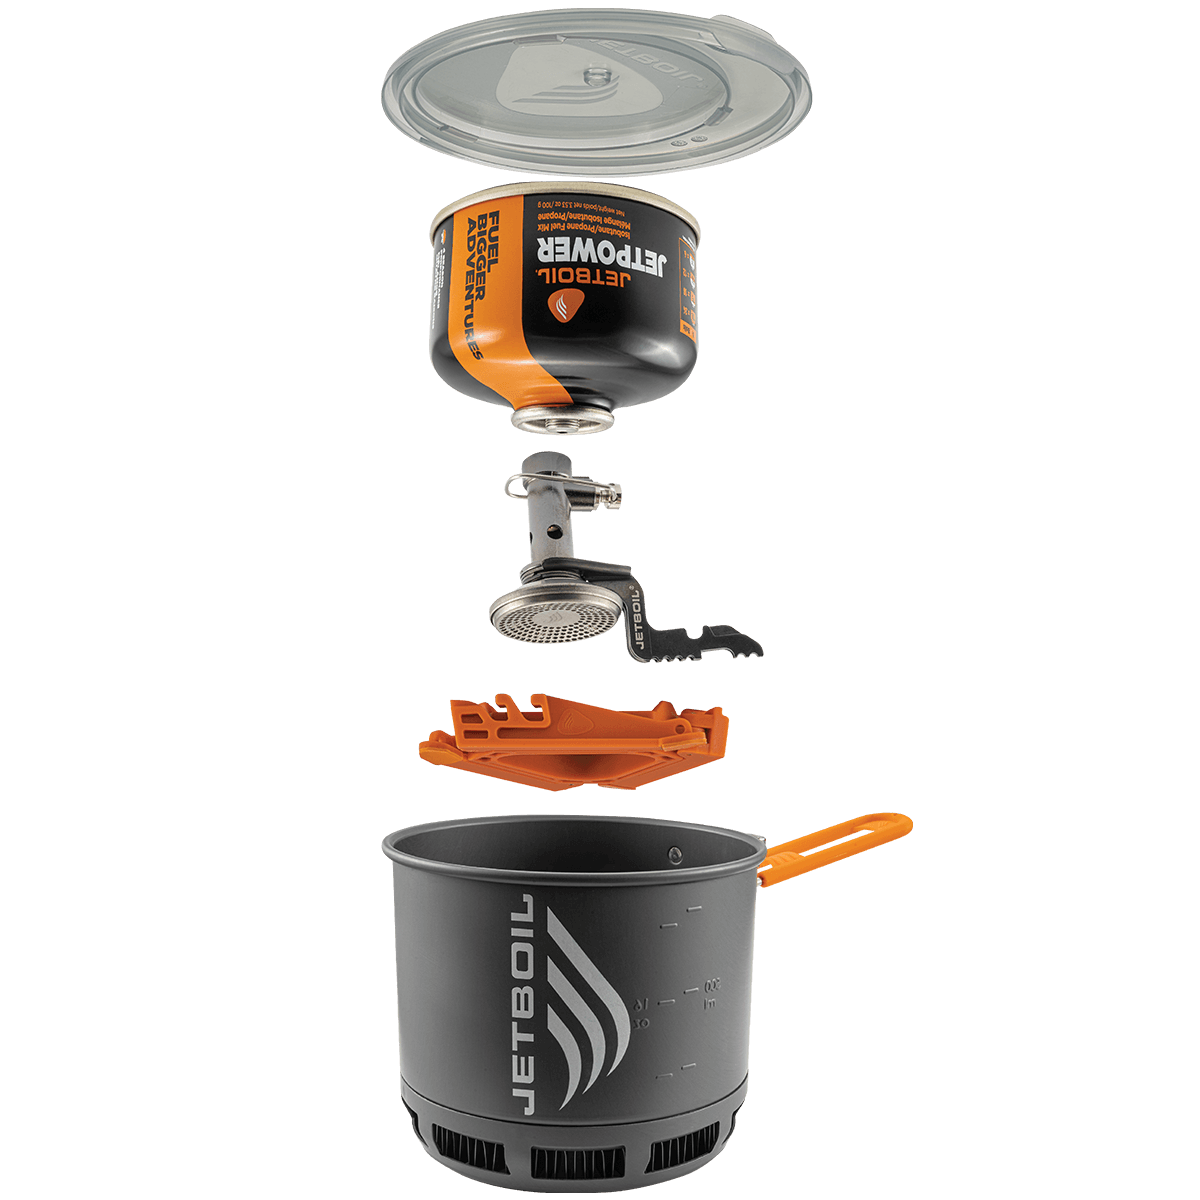 Jetboil Stash Stove Cooking System